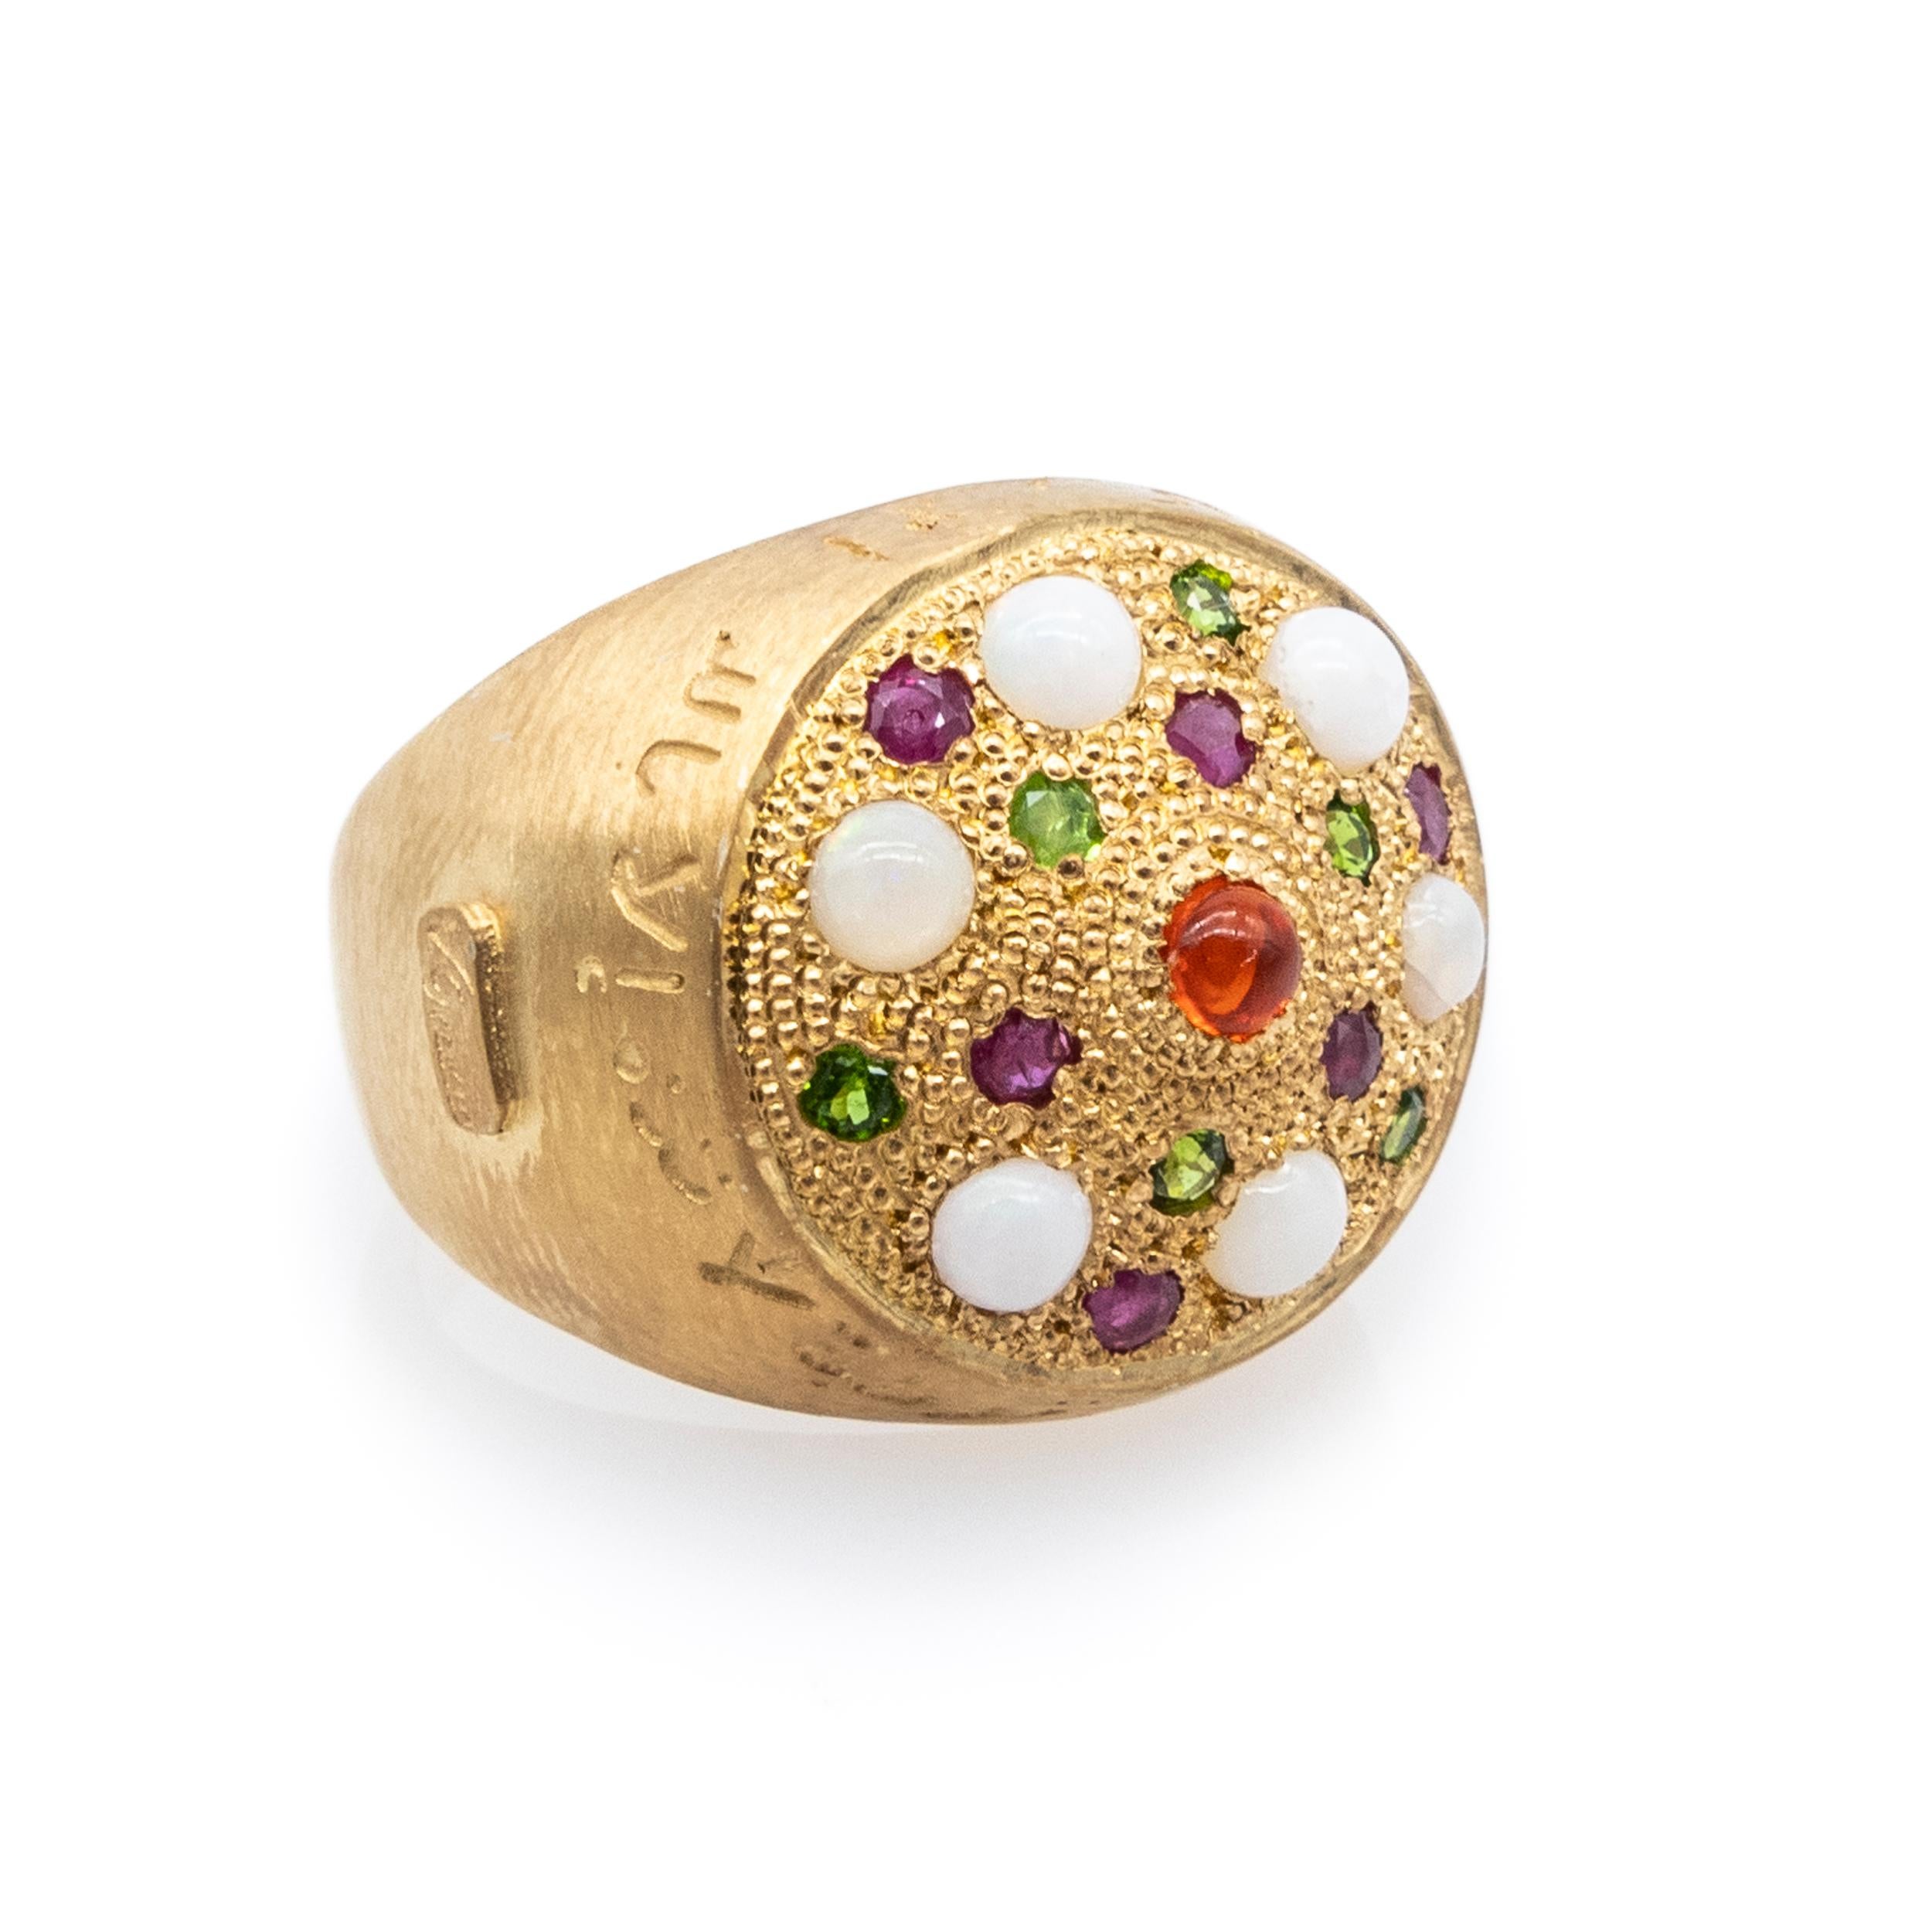 Silver Ring Gold Plating White Opals Red Fire Opal Emeralds Rubies

Silver ring with yellow gold plating, white cabochon-cut opals, central red fire opal cabochon, emeralds, and rubies.

Behold the exquisite allure of this captivating ring—a